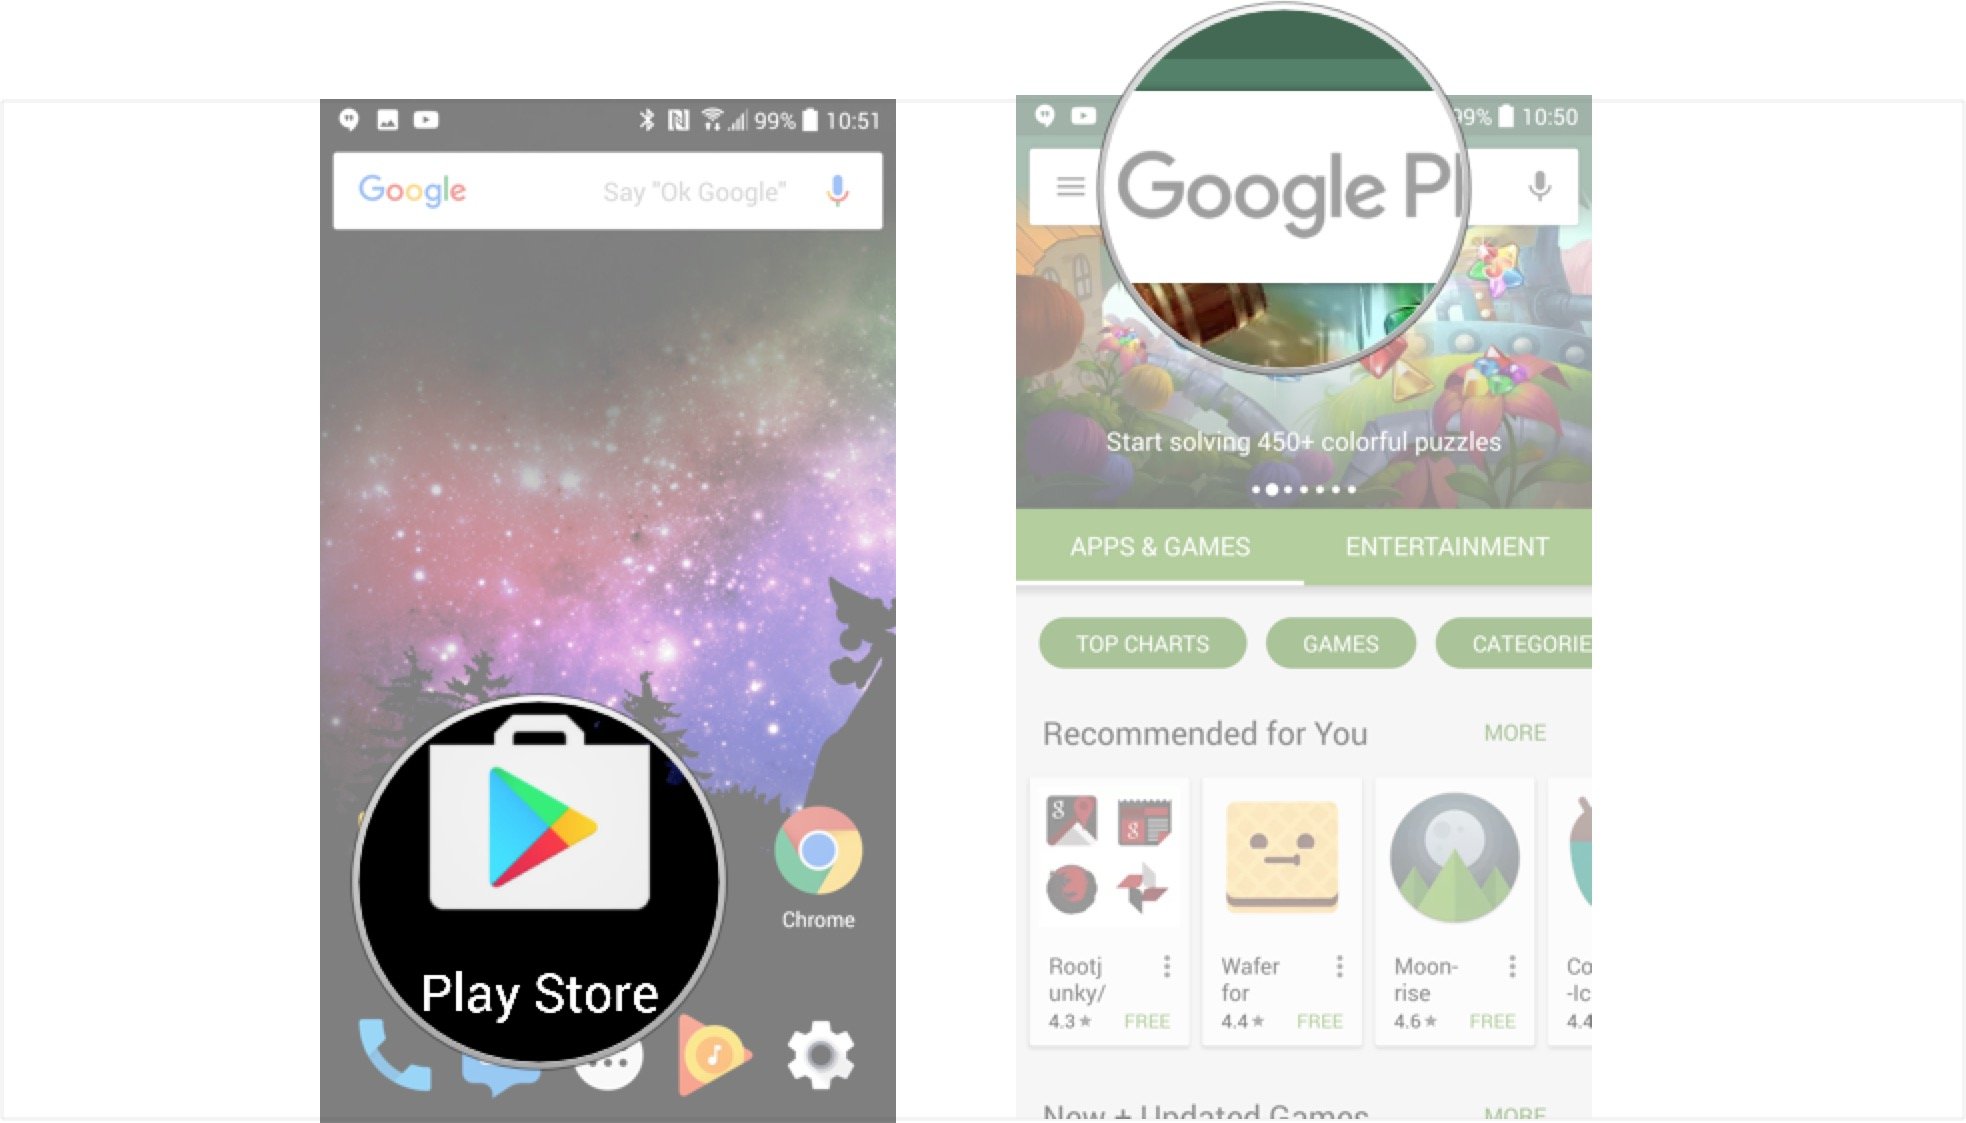 How to search for apps on Google Play Google-Play-search-apps-screens-01